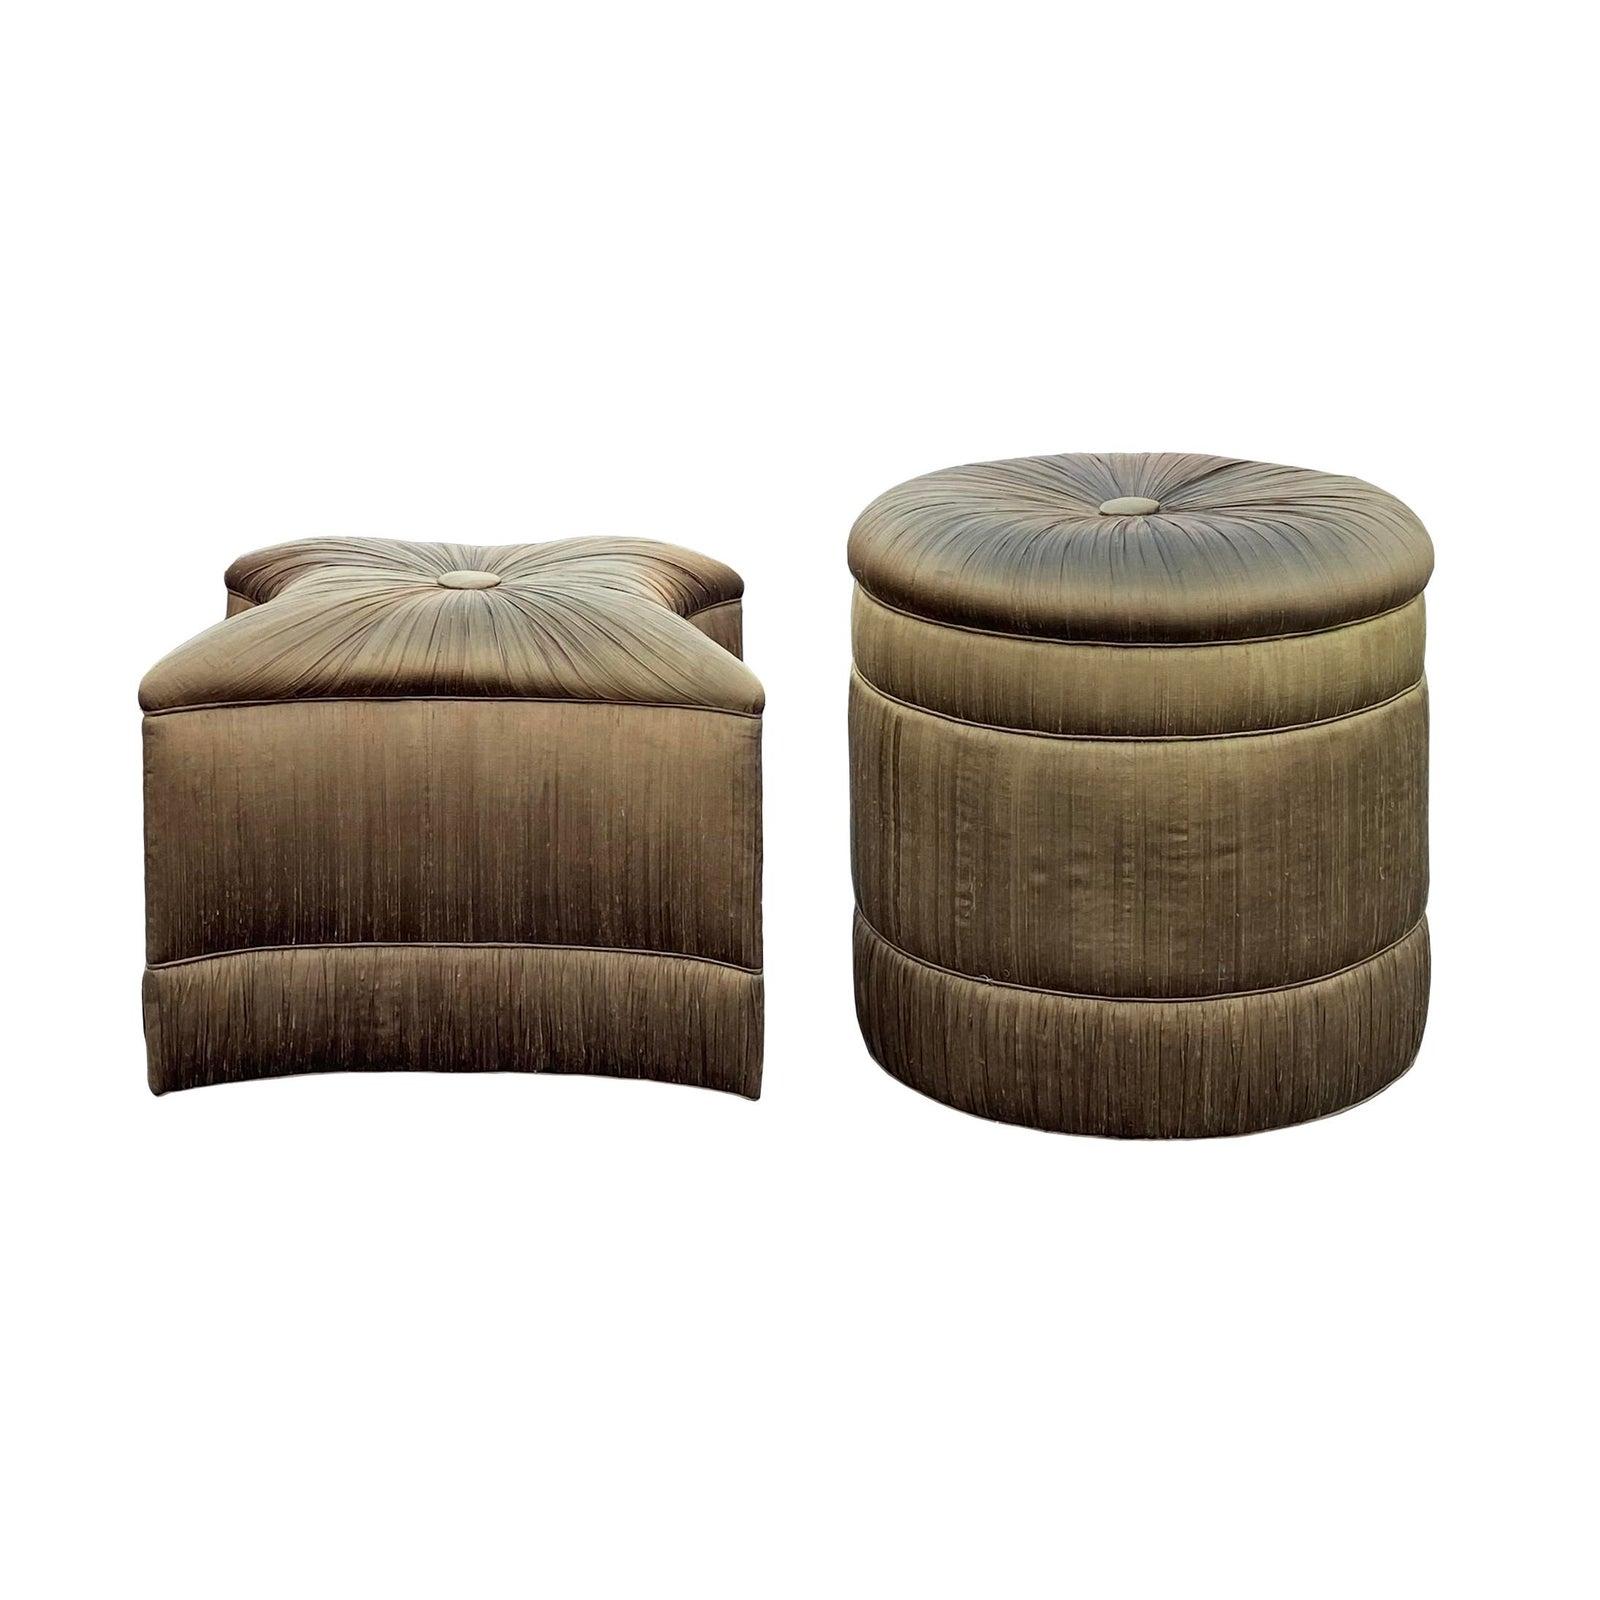 A gorgeous unique pair of grand large silk brown pleated custom ottomans with button tufts, Hollywood regency or art deco style. They fit beautifully into each other and the scale is quite large - make sure you note the measurements. Both ottomans